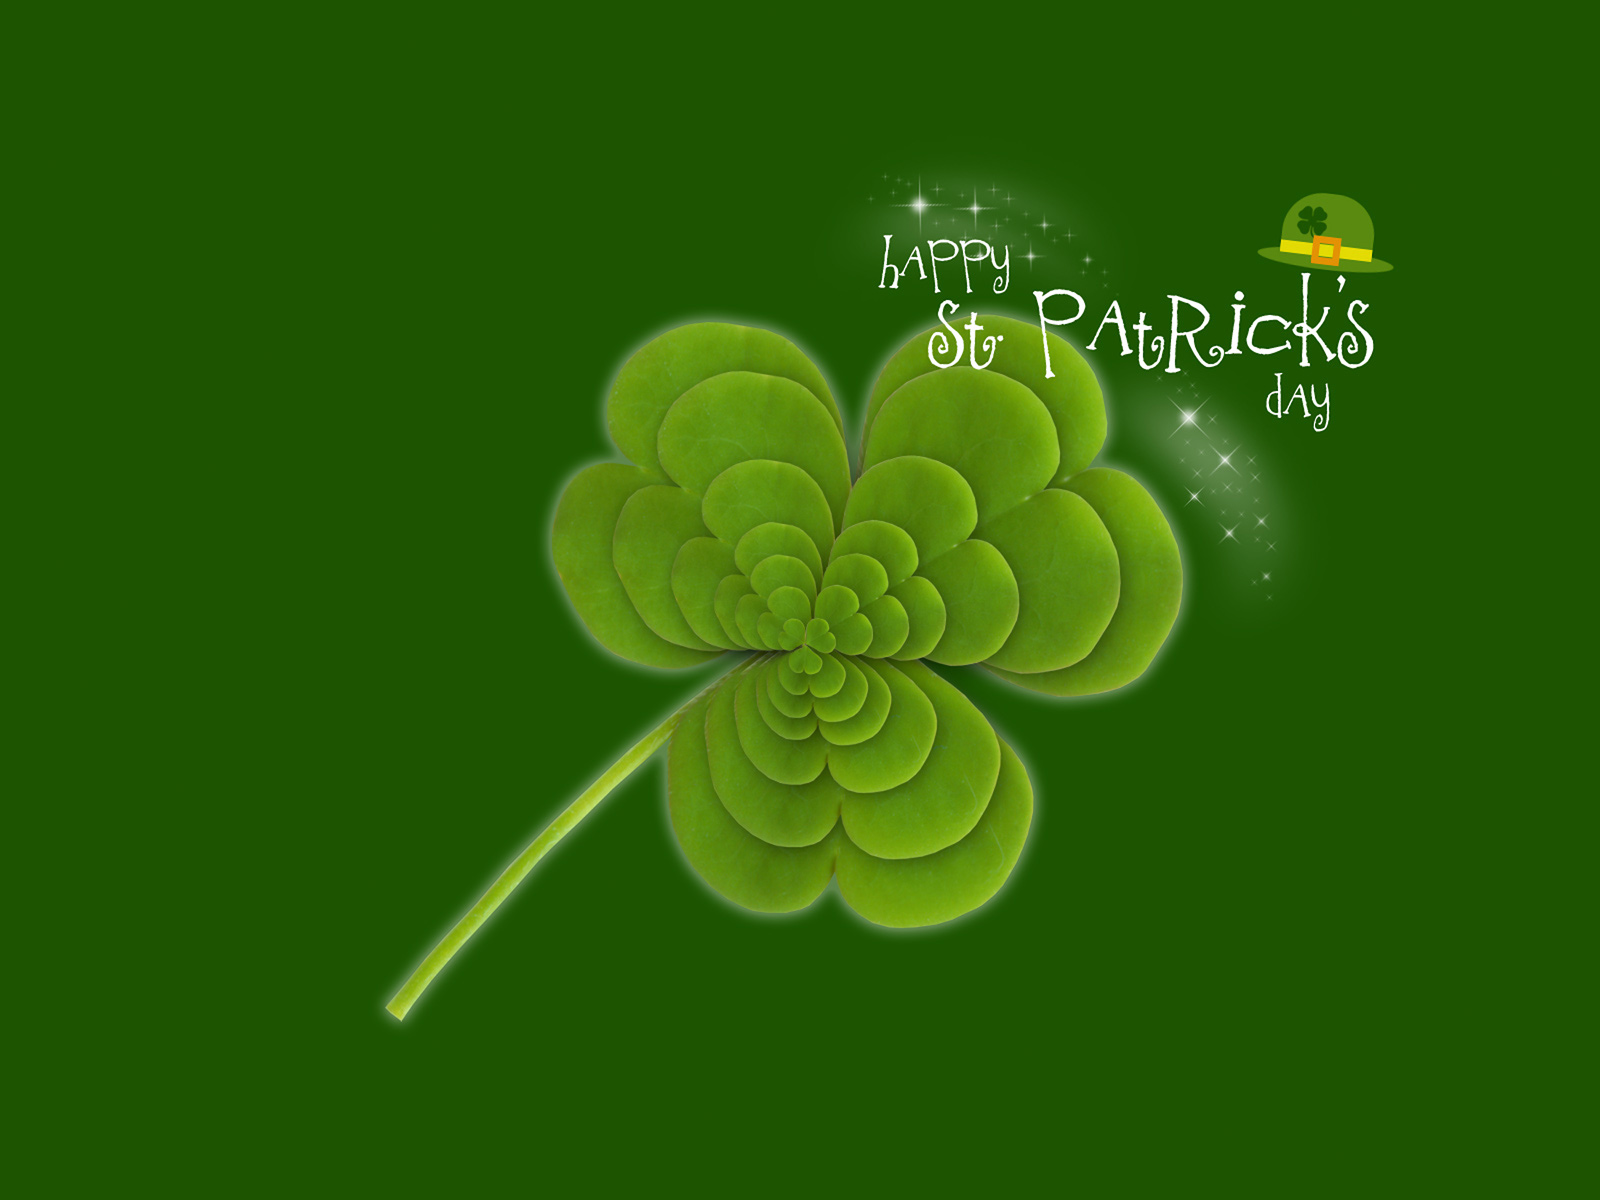 Saint Patrick Wallpaper And Image Pictures Photos